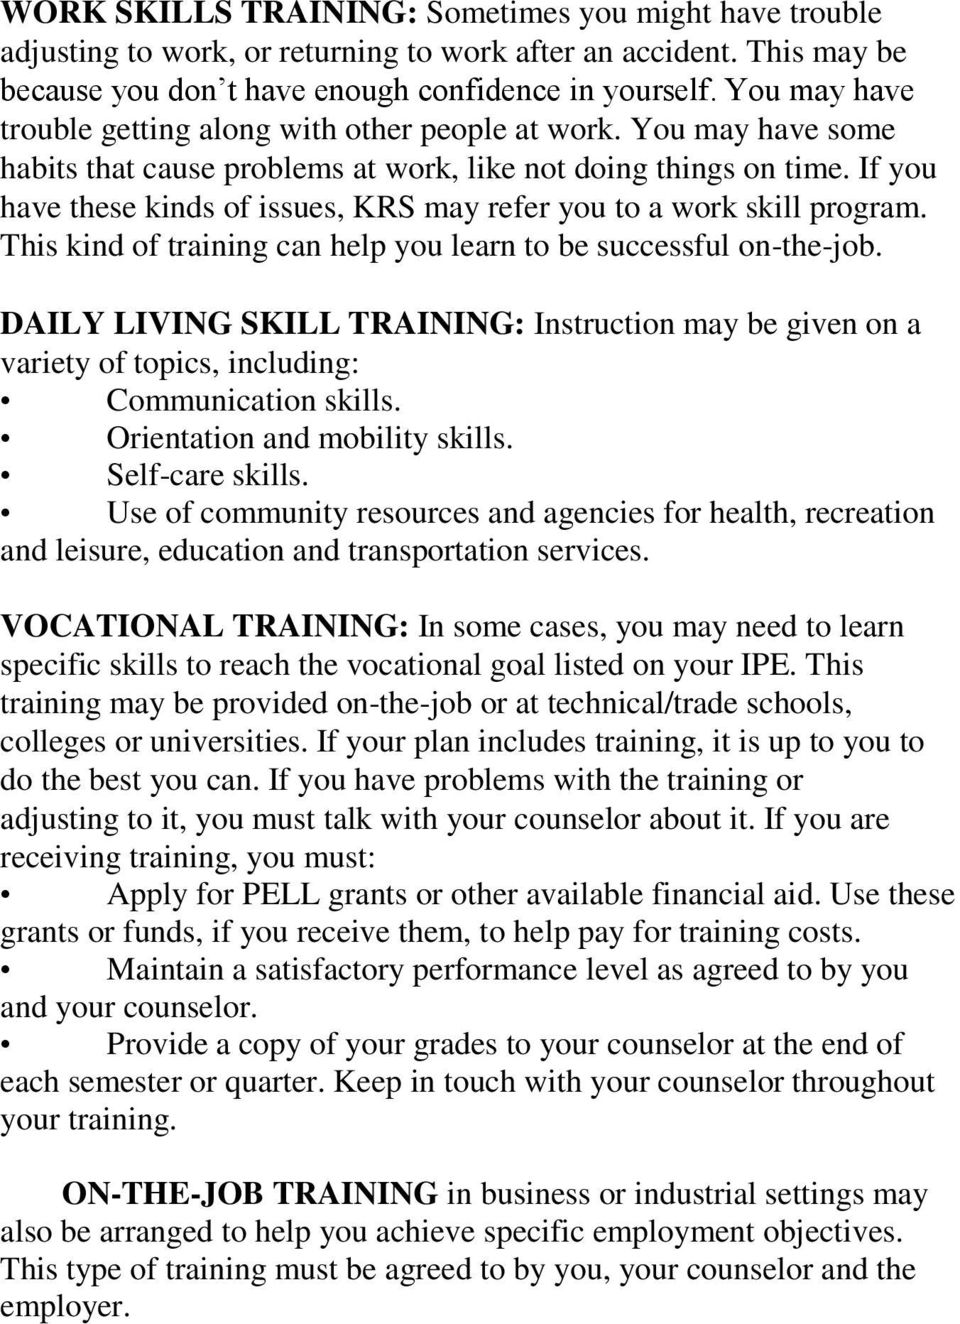 If you have these kinds of issues, KRS may refer you to a work skill program. This kind of training can help you learn to be successful on-the-job.